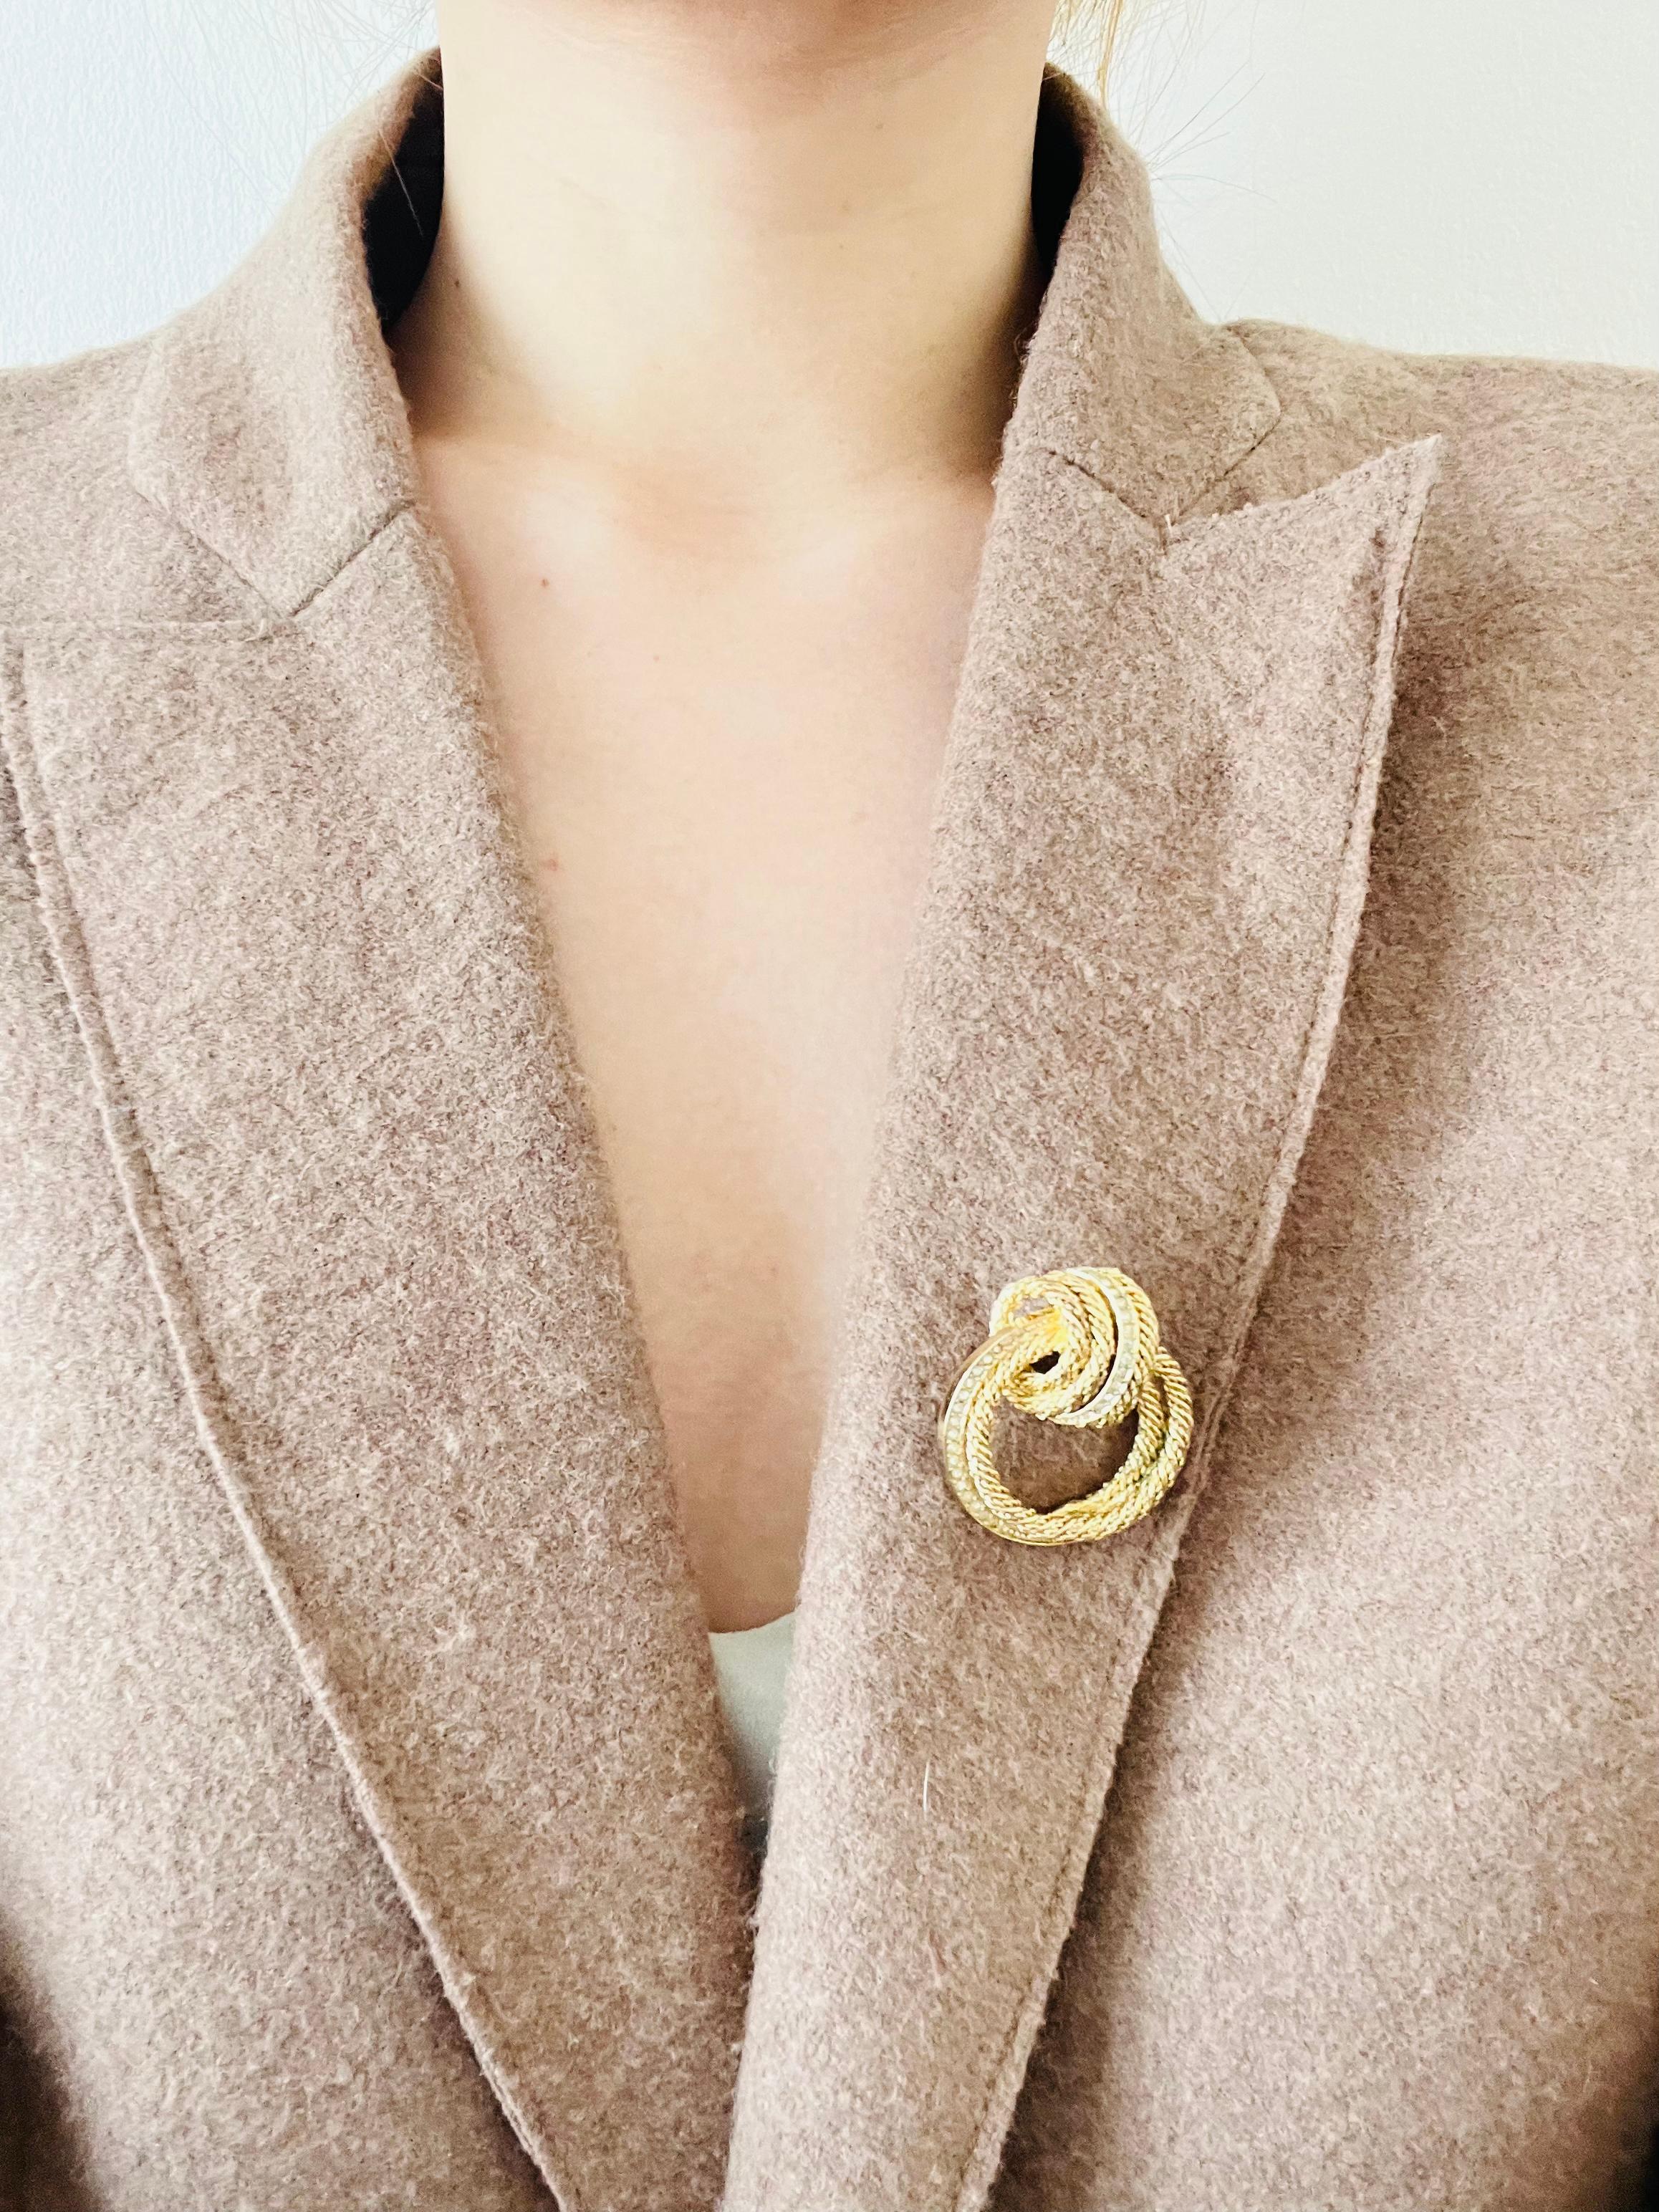 Christian Dior GROSSE 1980s Vintage Crystals Hoop Knot Twist Rope Gold Brooch In Good Condition For Sale In Wokingham, England